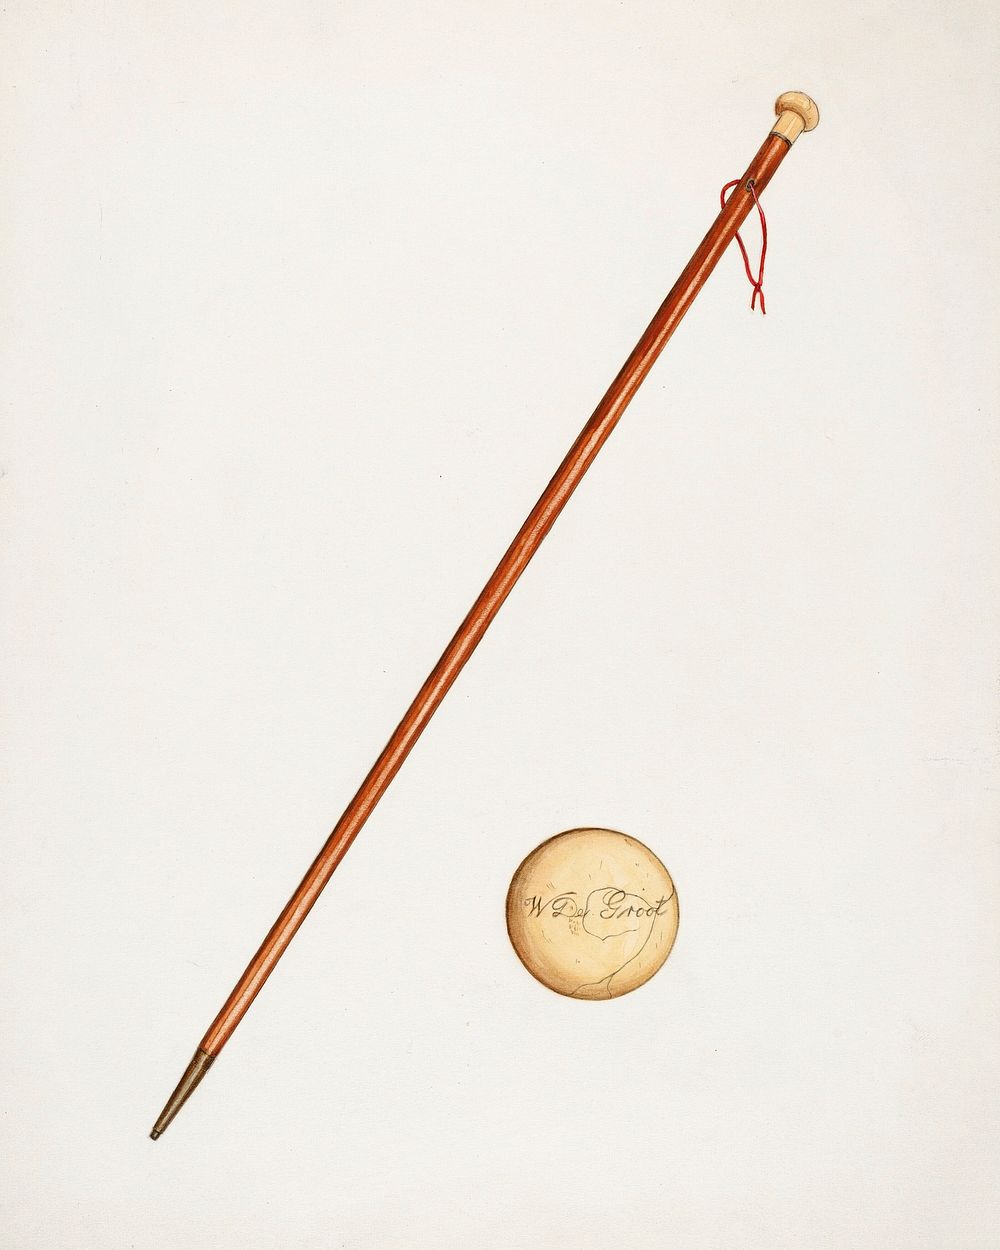 Cane (ca.1936) by Gladys Cook. Original from The National Gallery of Art. Digitally enhanced by rawpixel.